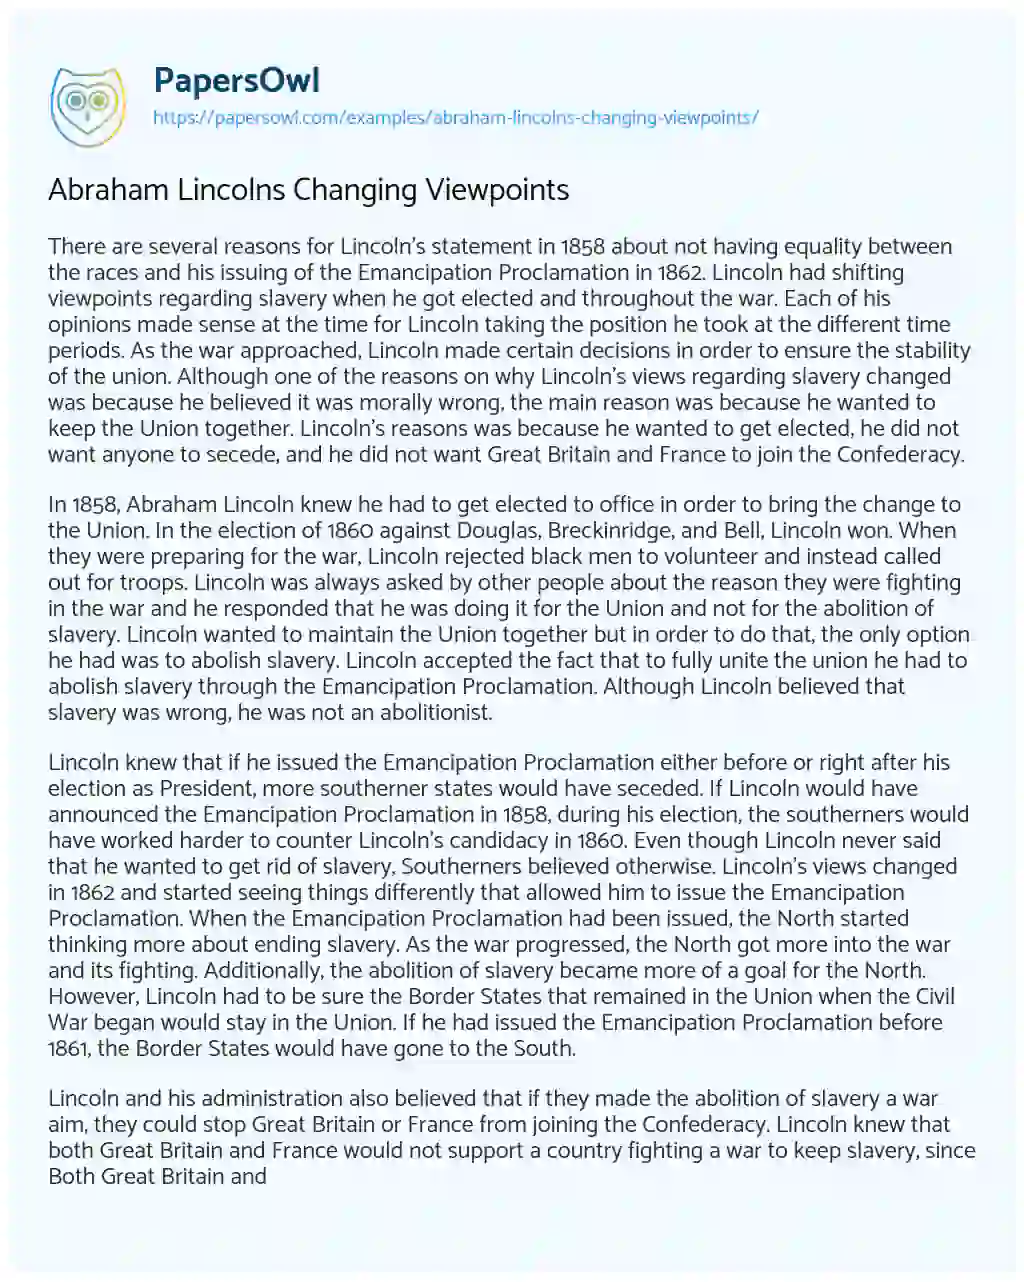 Essay on Abraham Lincolns Changing Viewpoints